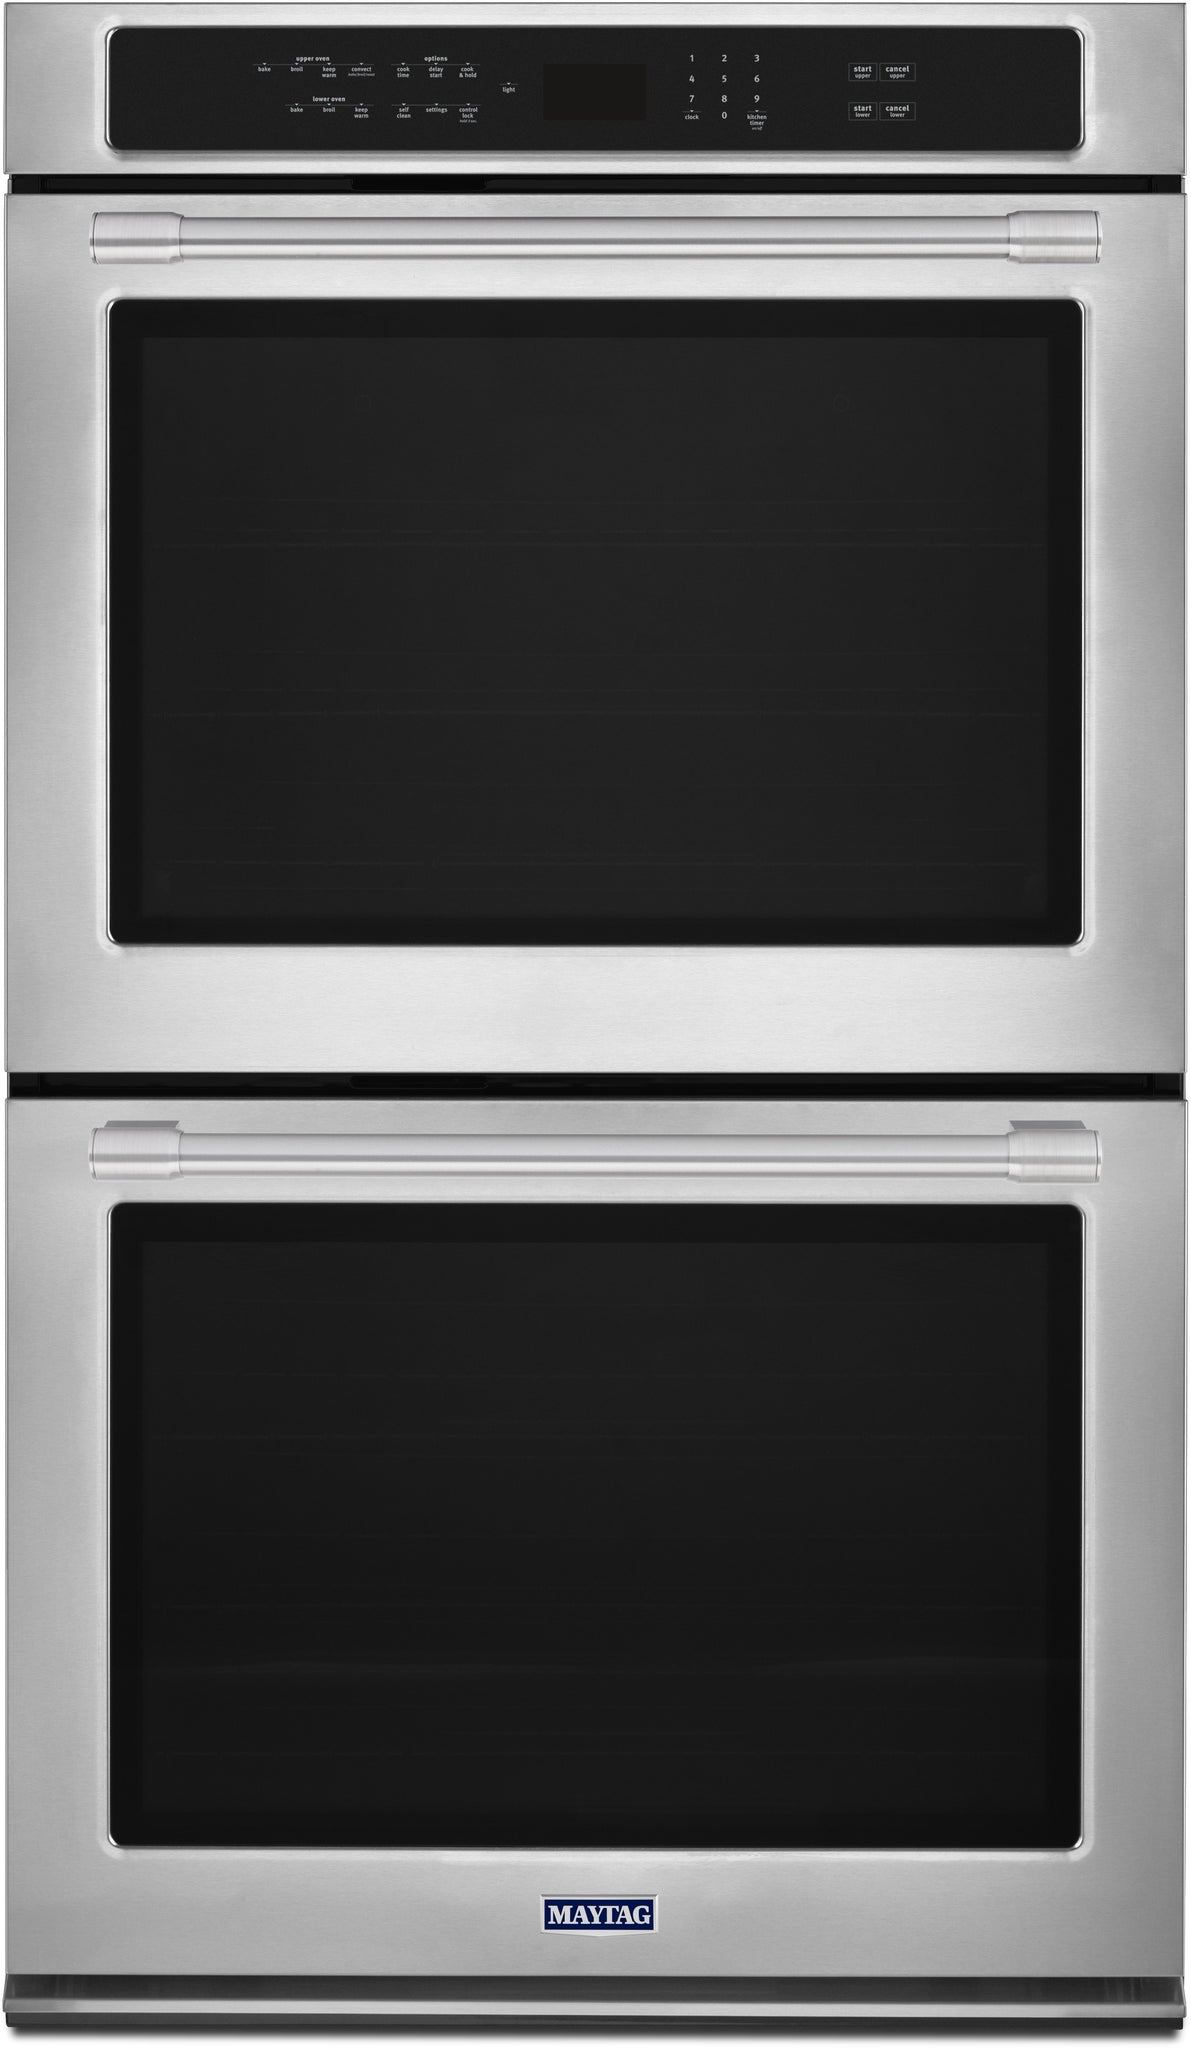 Maytag 27 Inch Double Electric Wall Oven (MEW9627FZ)